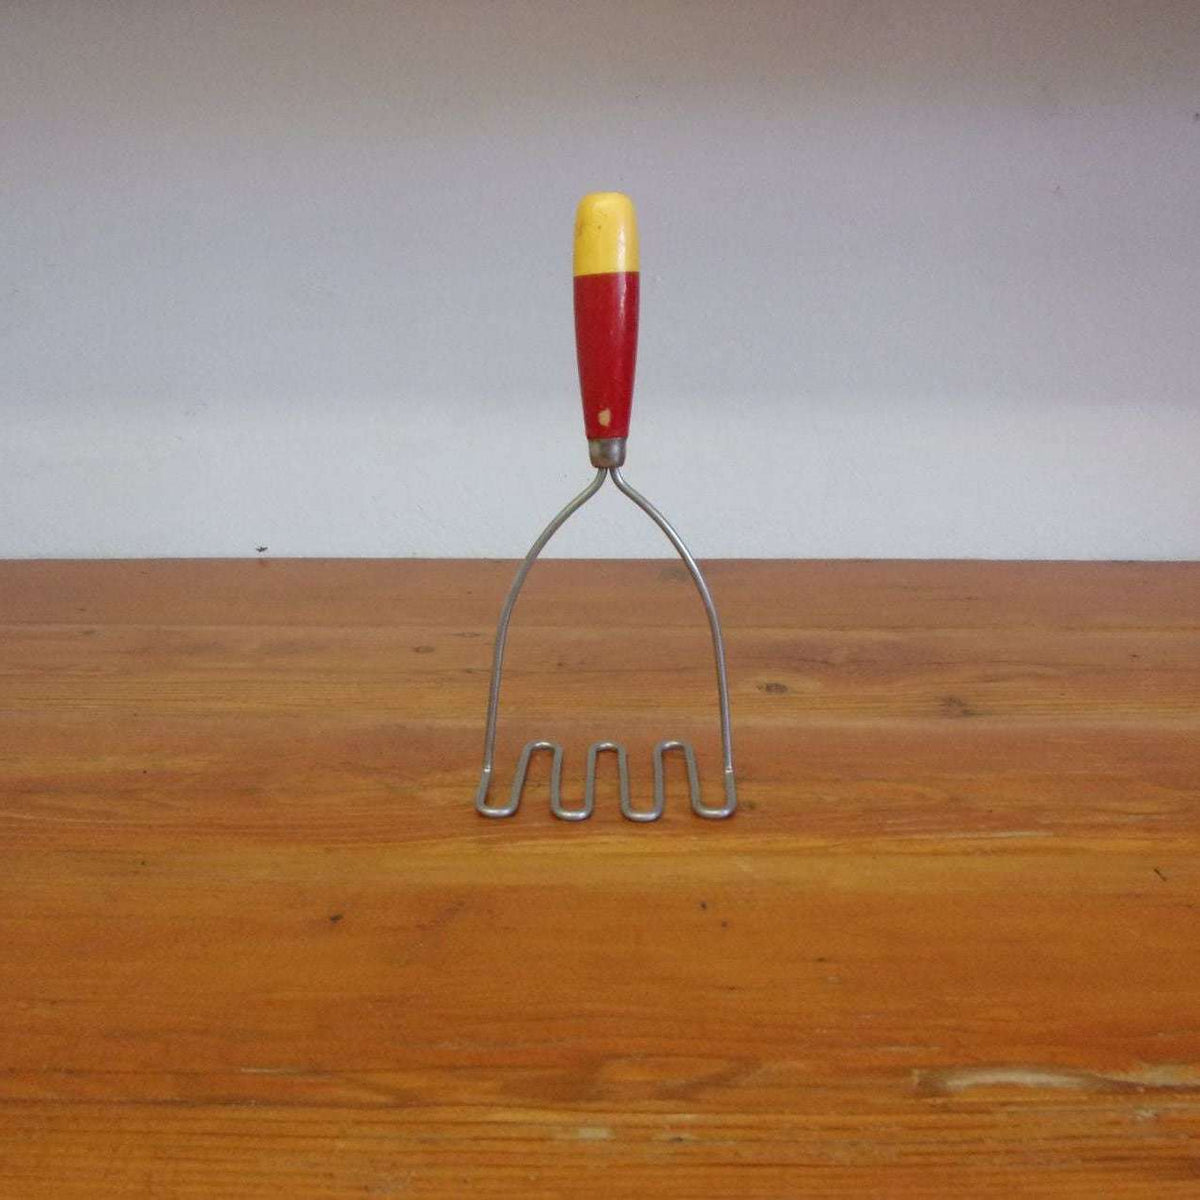 http://maandpasattic.com/cdn/shop/files/antique-vintage-potato-masher-with-red-with-white-handle-kitchen-tools-gadgets-ma-and-pas-attic-32293012_1200x1200.jpg?v=1683068936